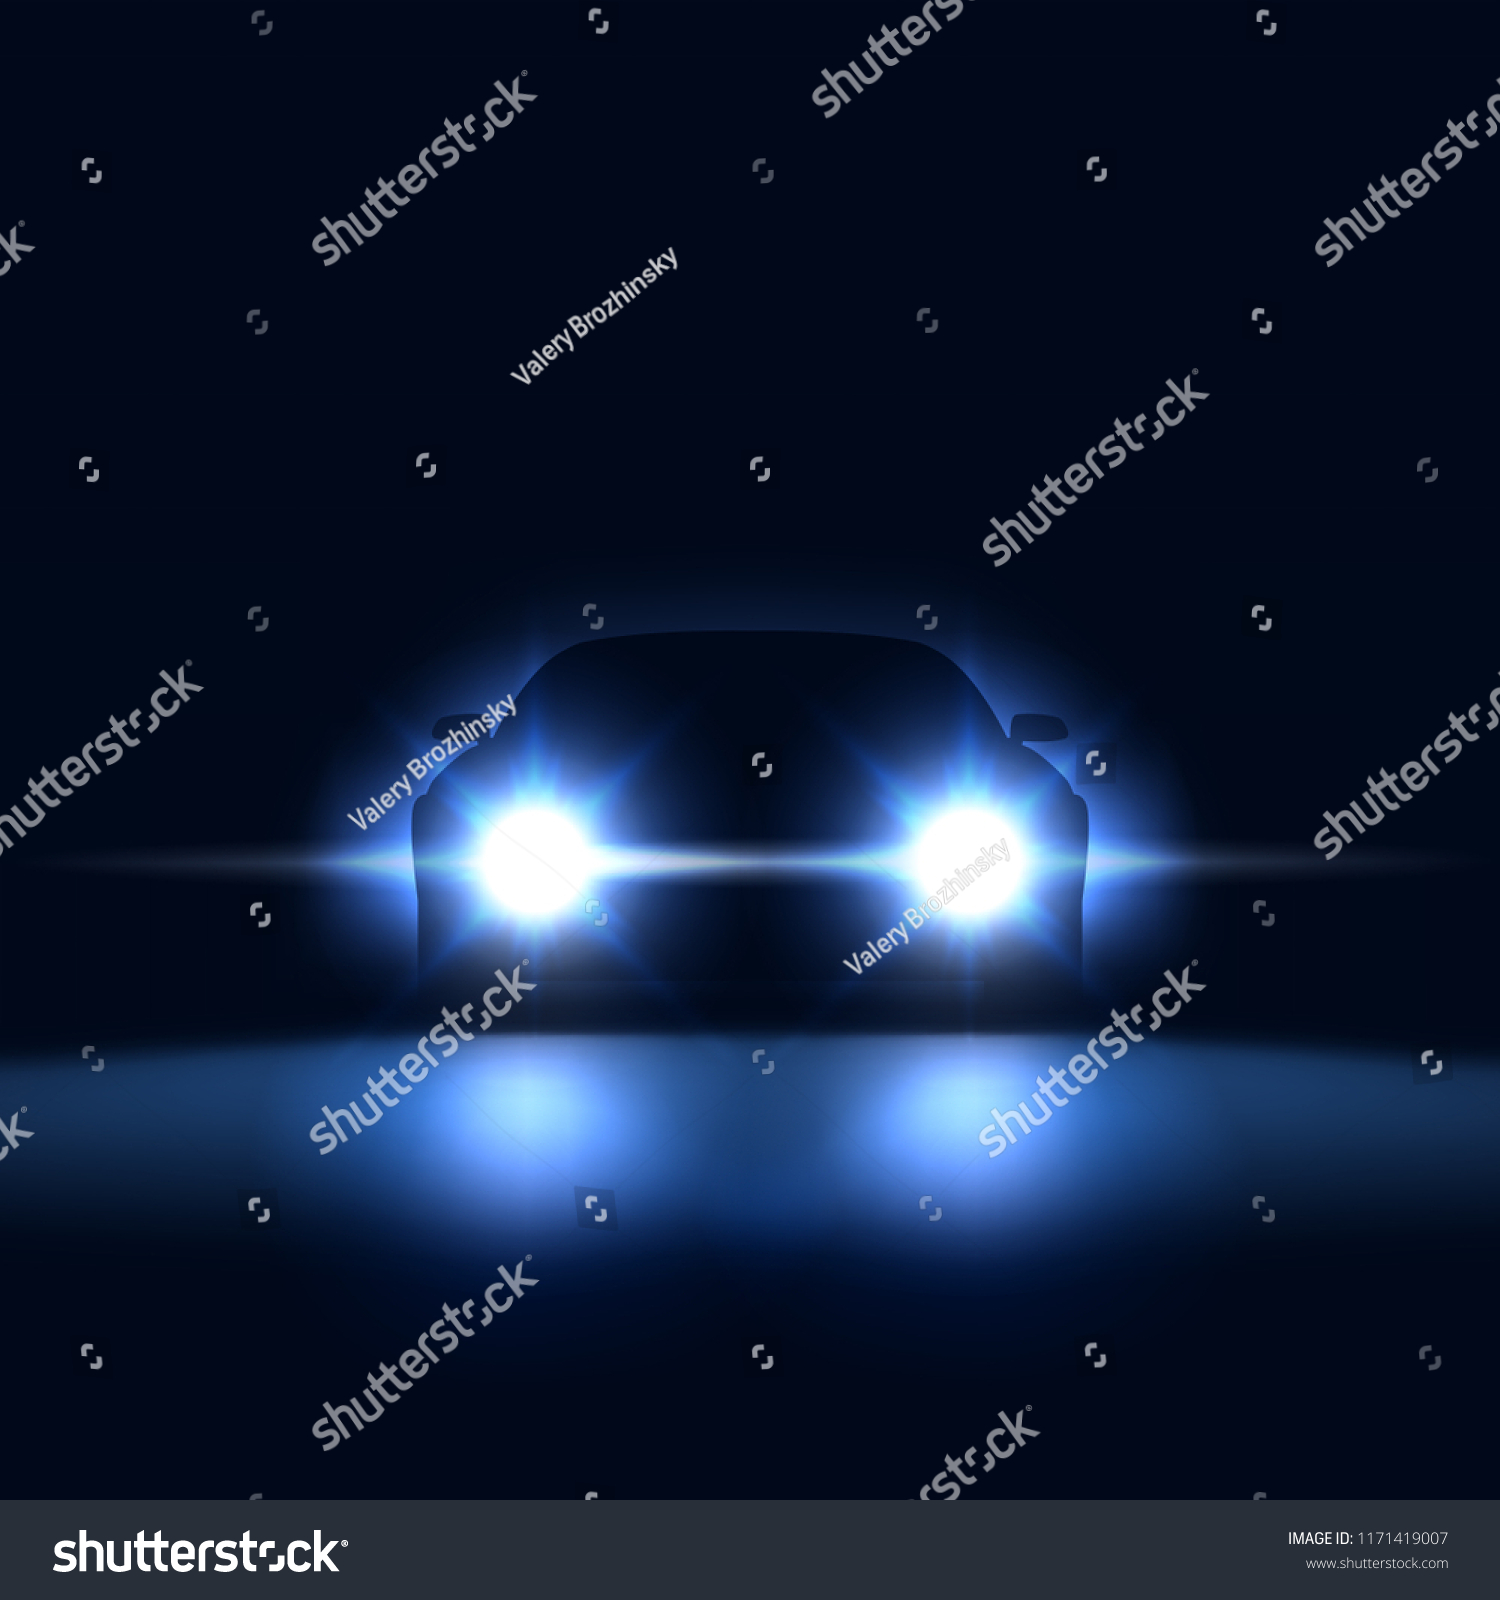 SVG of Night car with bright headlights approaching in the dark, silhouette of car with xenon headlights in the showroom, vector illustration svg